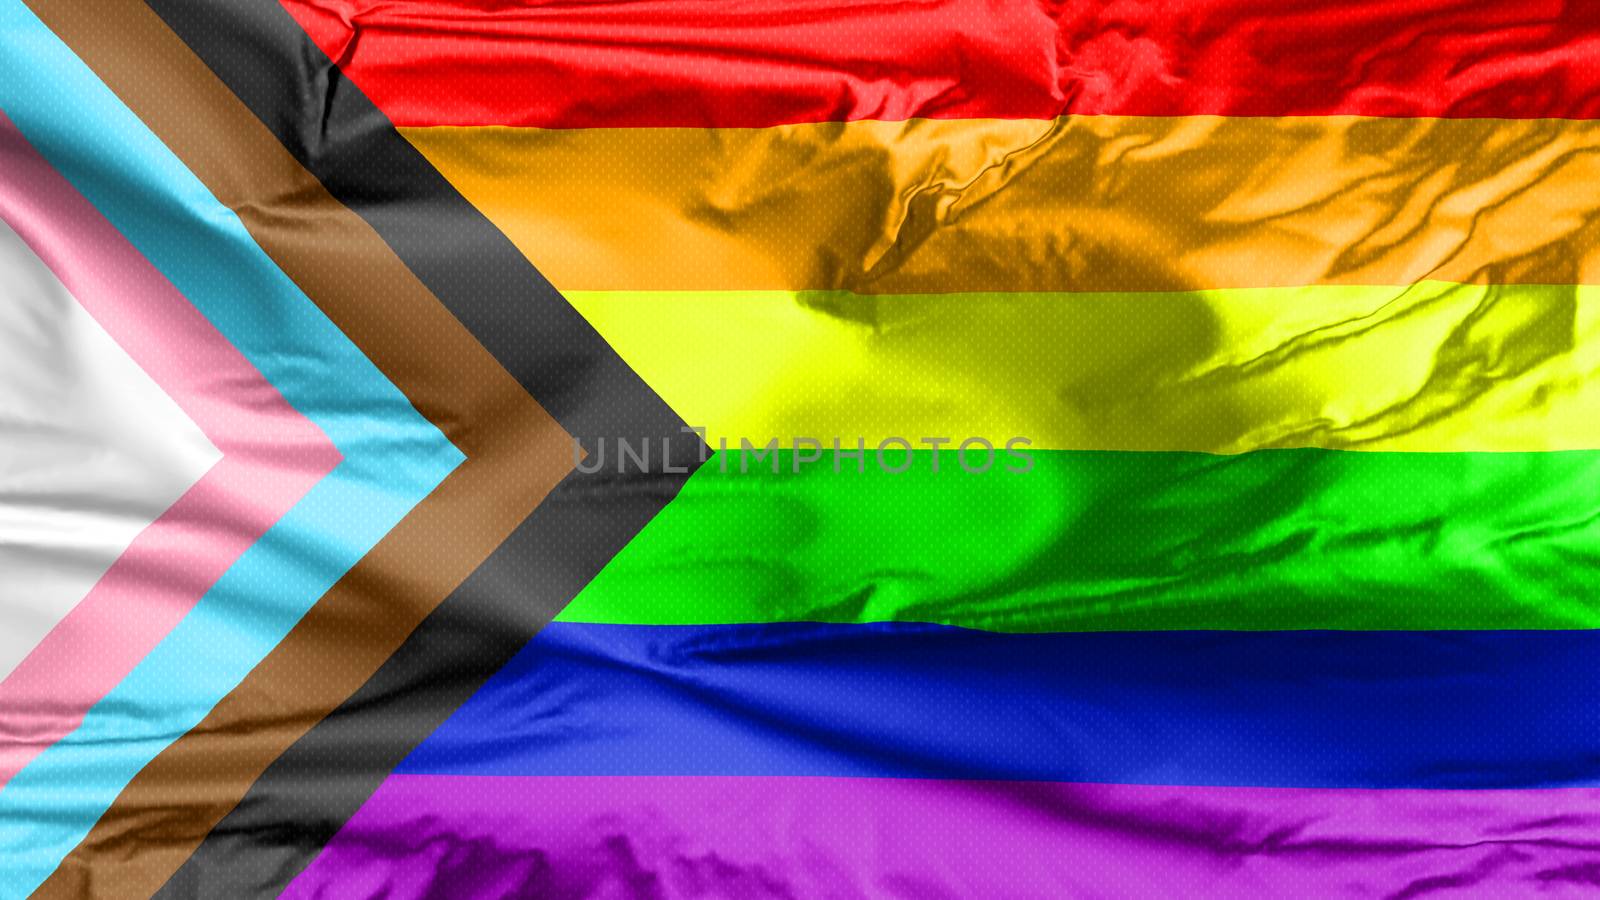 LGBT Rainbow Flag with inclusion and progression colors. Symbol of lesbian, gay, bisexual &amp; transgender community. Black and brown stripes to represent marginalised LGBT. by oasisamuel